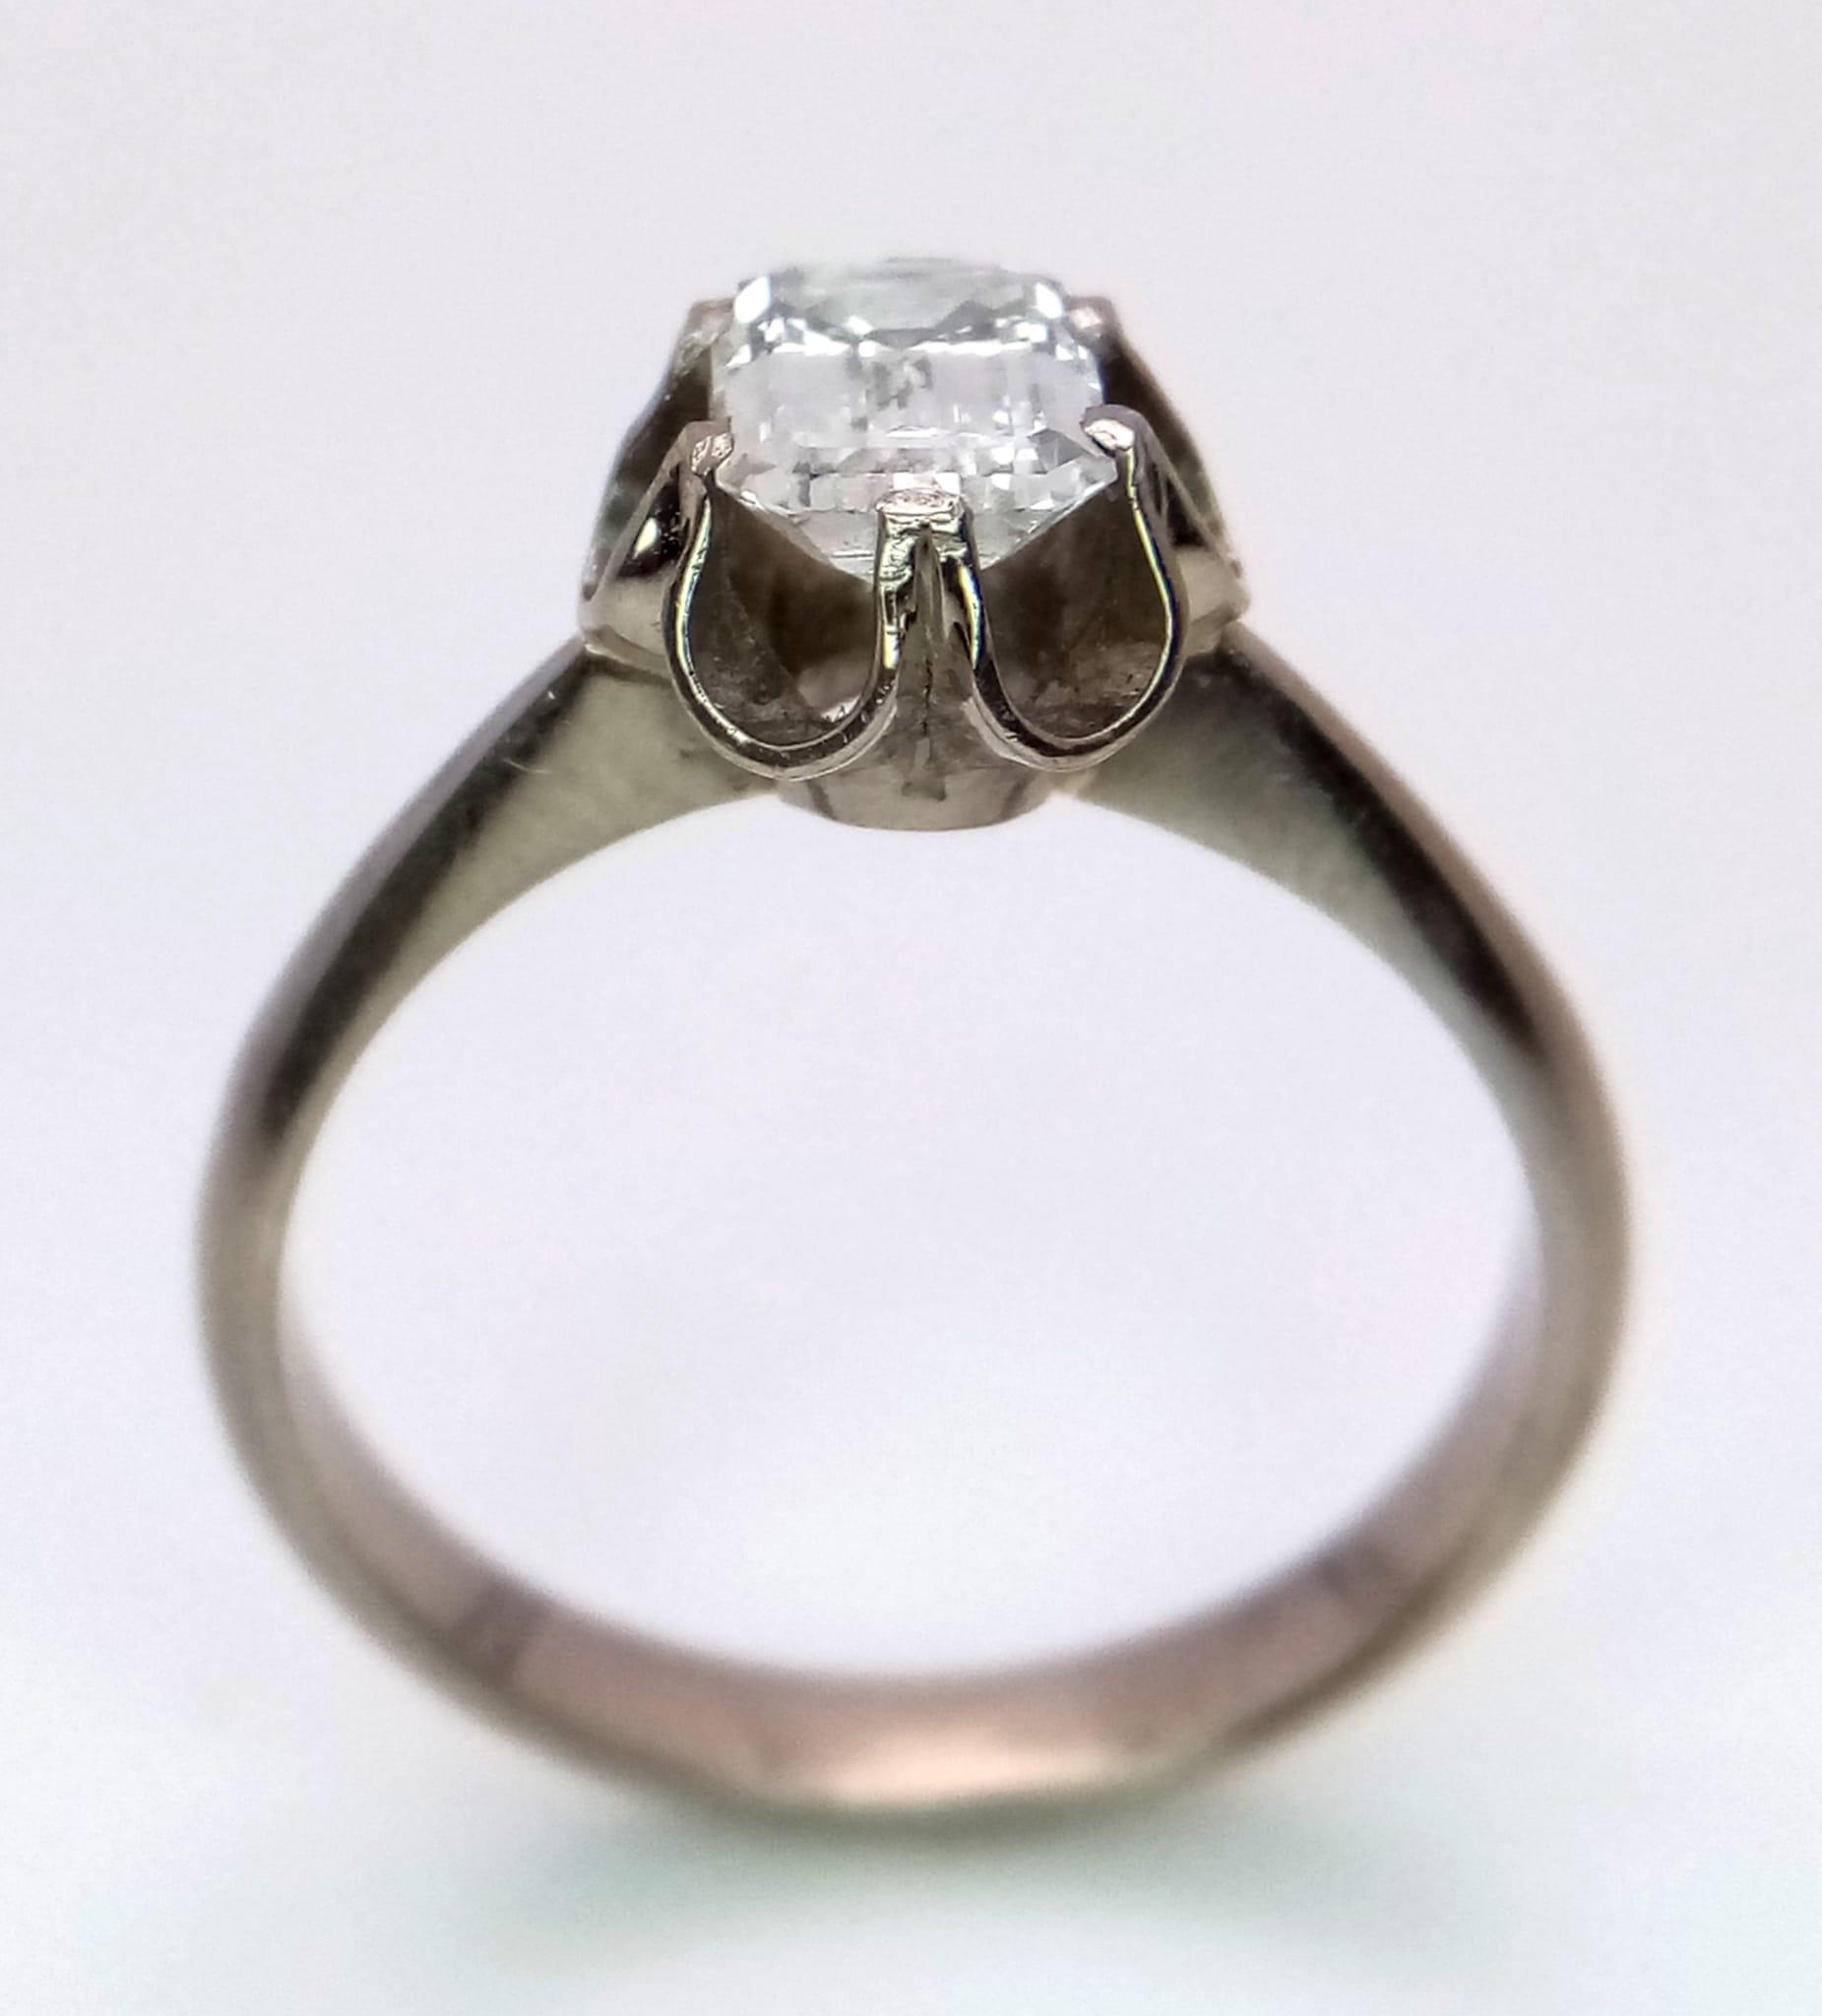 An 18K White Gold (tested) Emerald Cut Diamond Solitaire Ring. Beautiful 1ct central diamond. Size - Image 6 of 6